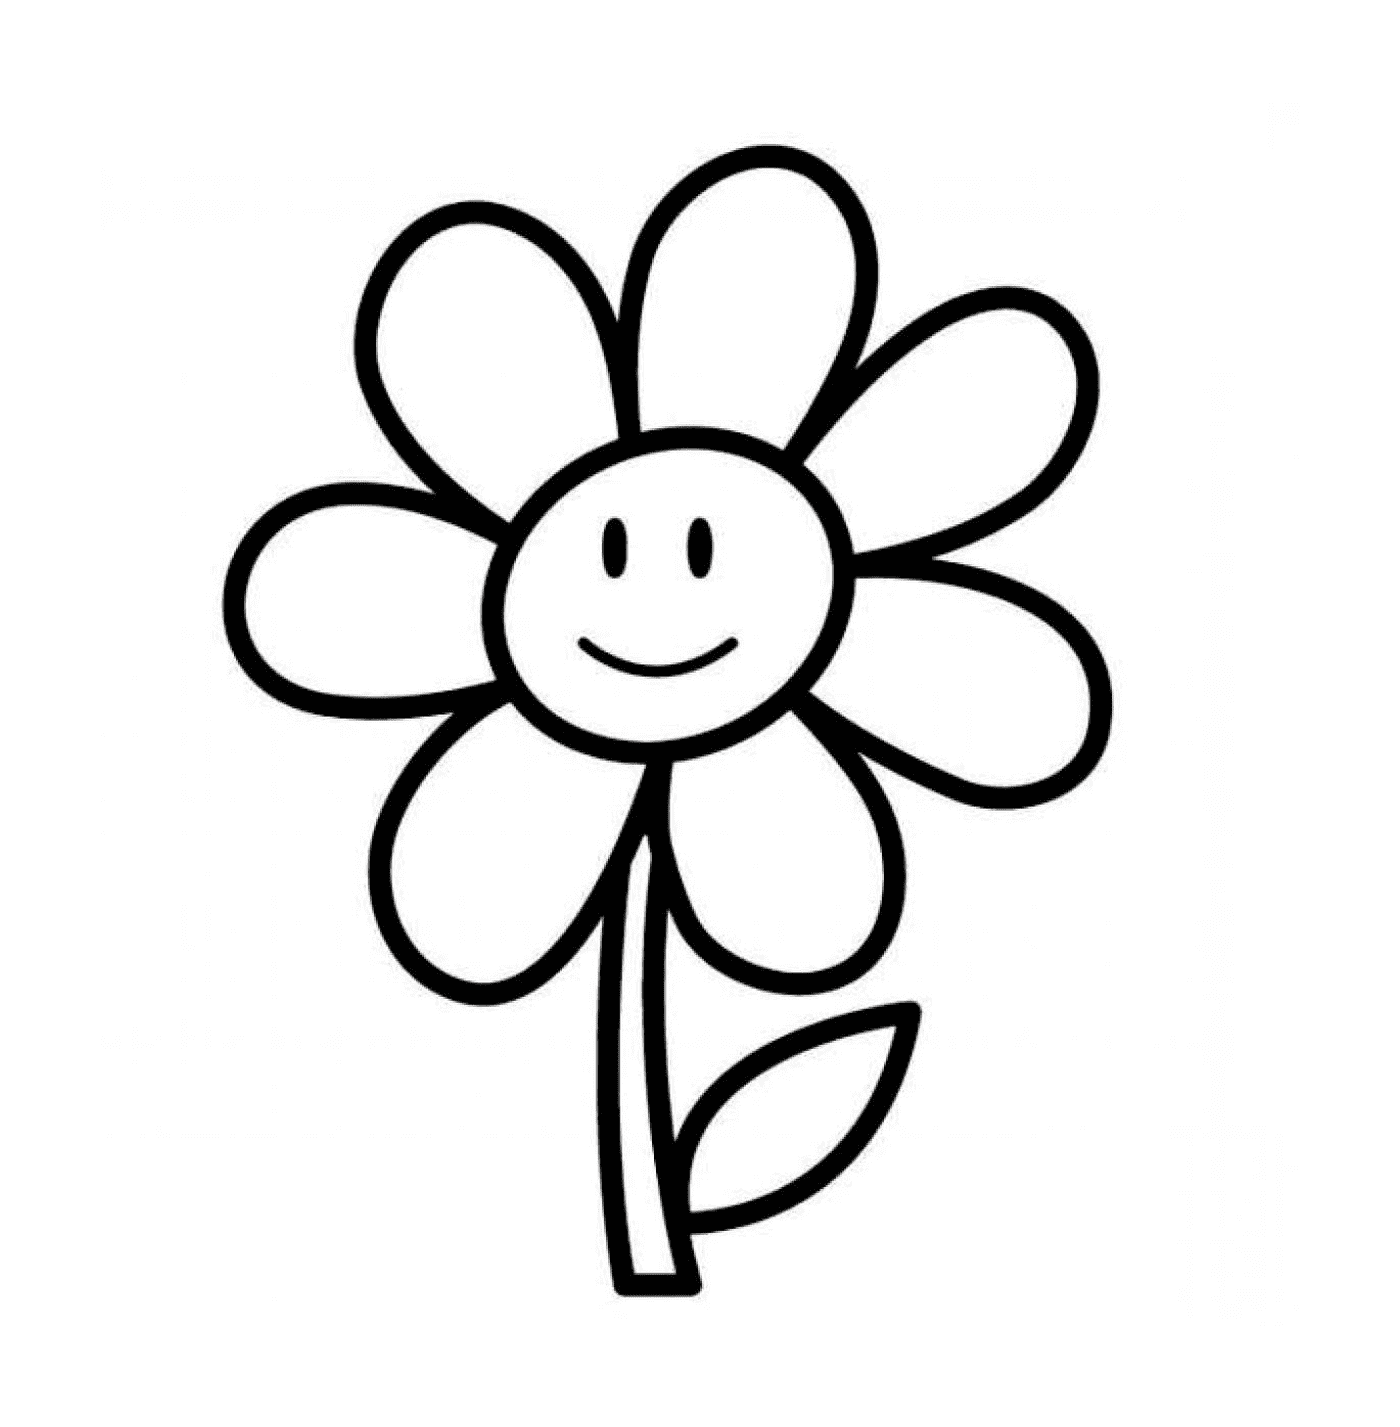  A smiling flower 